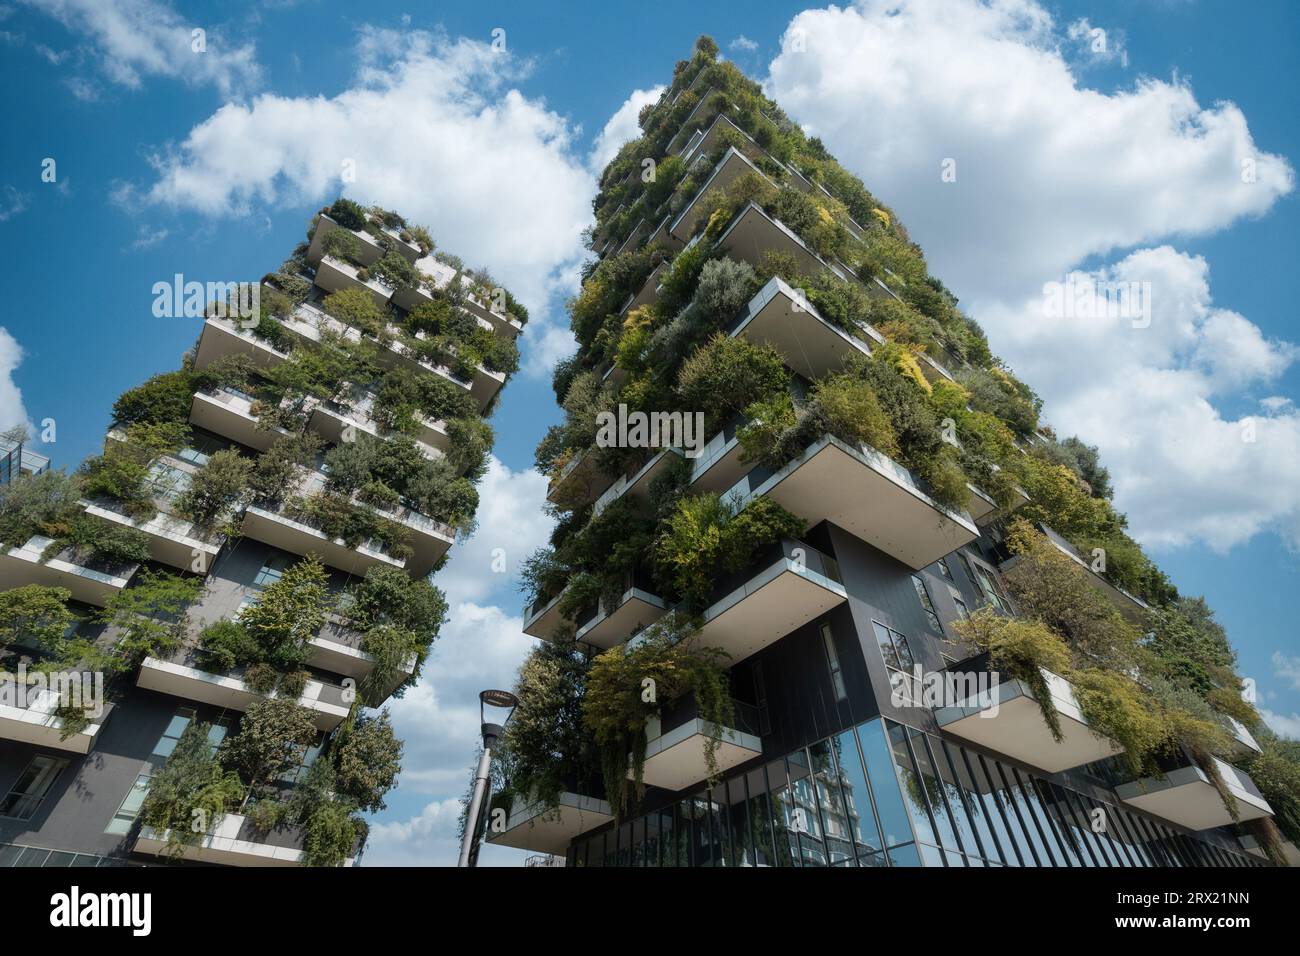 Modern architectural landmark Bosco Verticale (Vertical Forest) buildings in the Porta Nuova district of Milan, Italy. Stock Photo